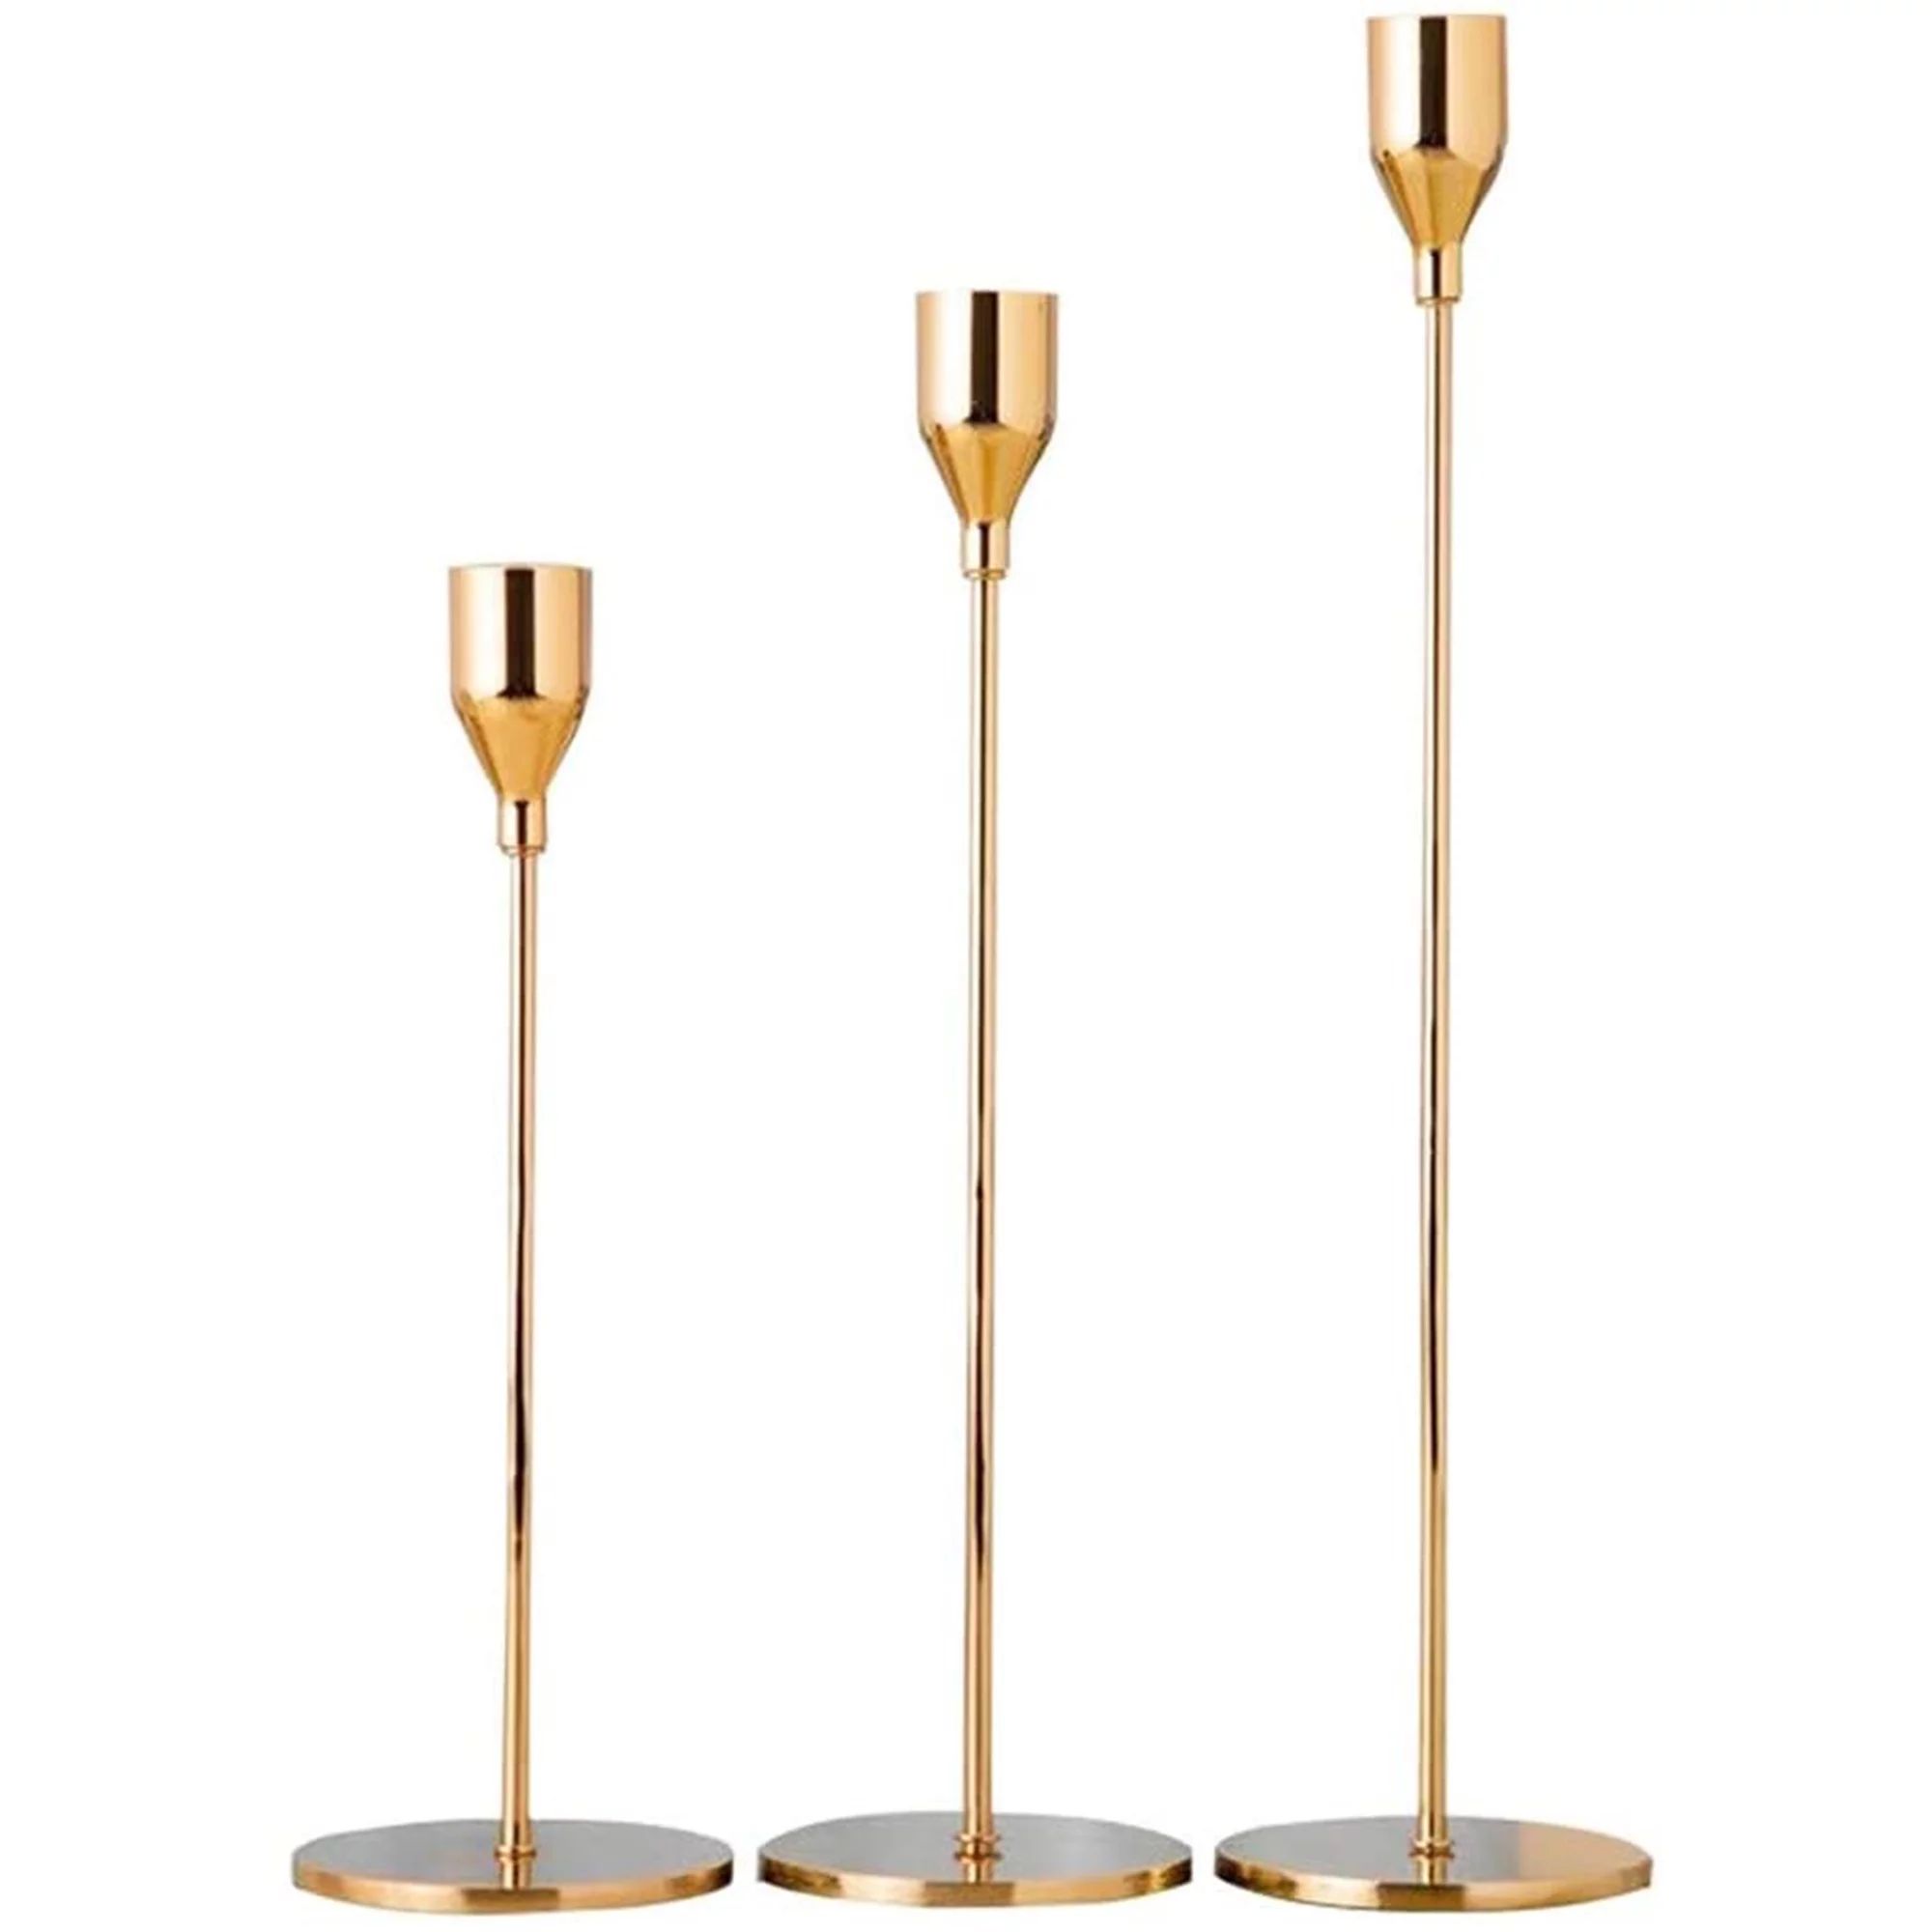 Sziqiqi Gold Candle Holders for Candlesticks Taper Candlestick Holder Set of 3 | Walmart (US)